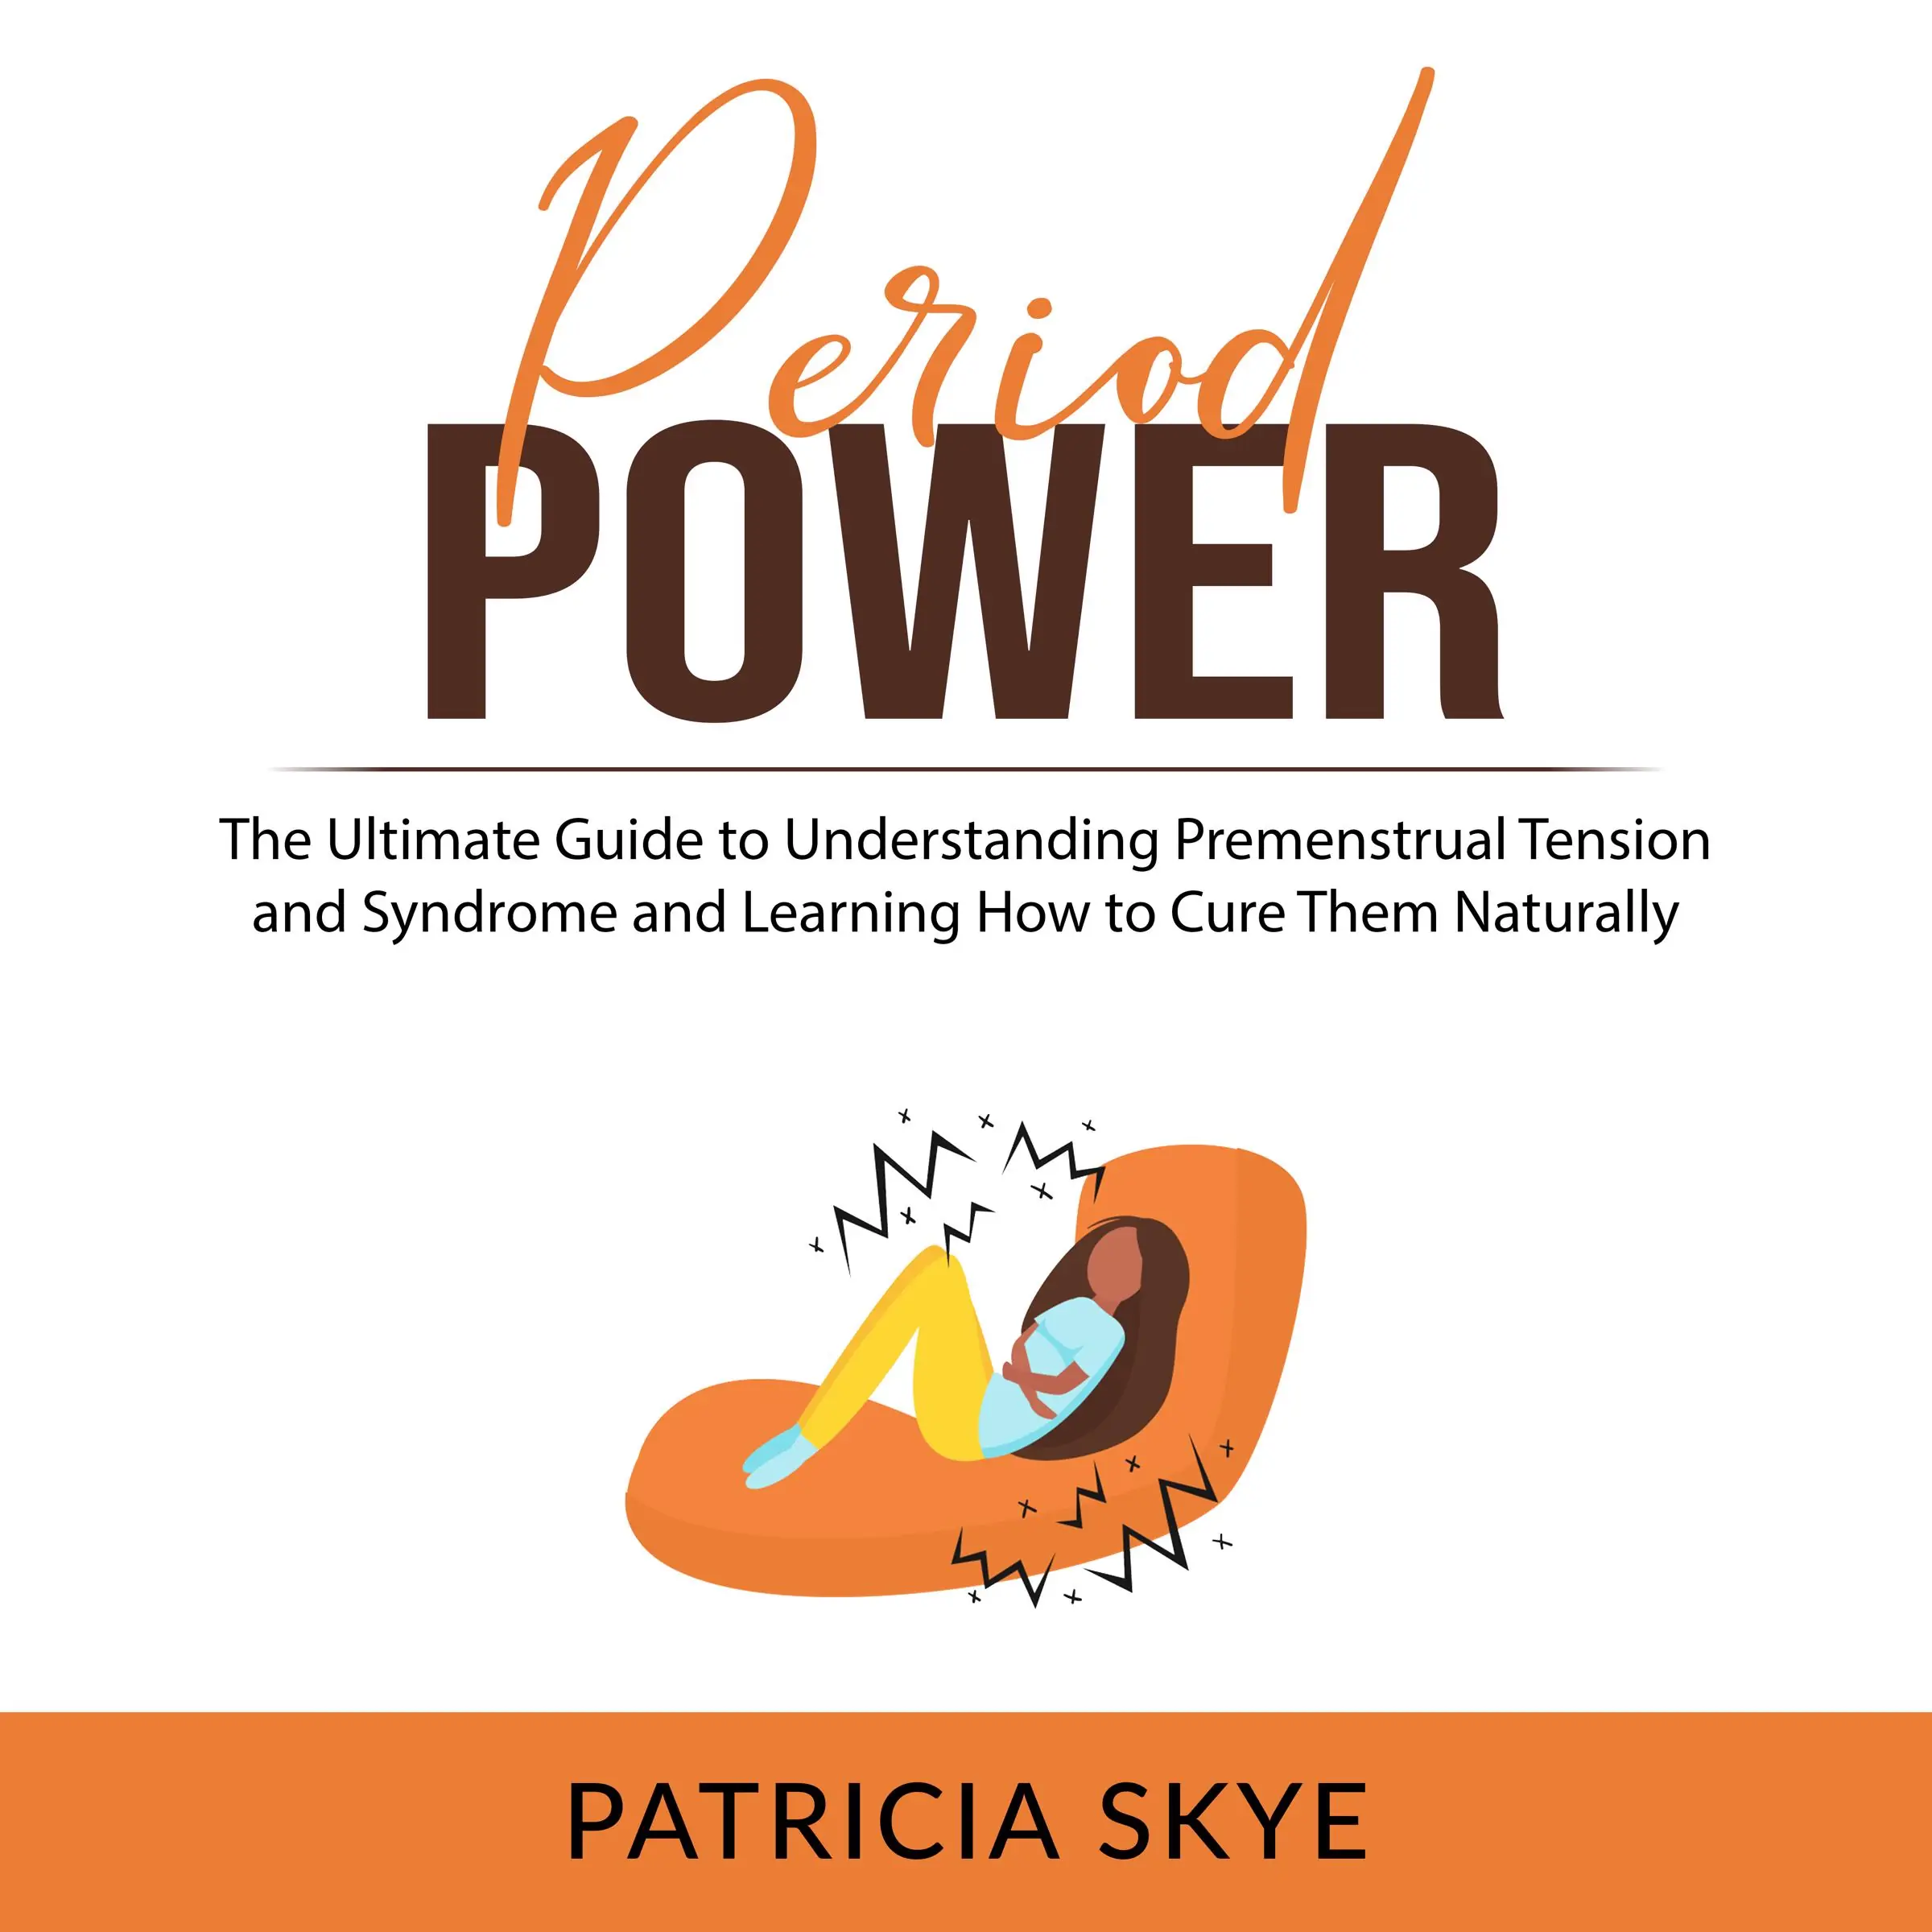 Period Power: The Ultimate Guide to Understanding Premenstrual Tension and Syndrome and Learning How to Cure Them Naturally Audiobook by Patricia Skye